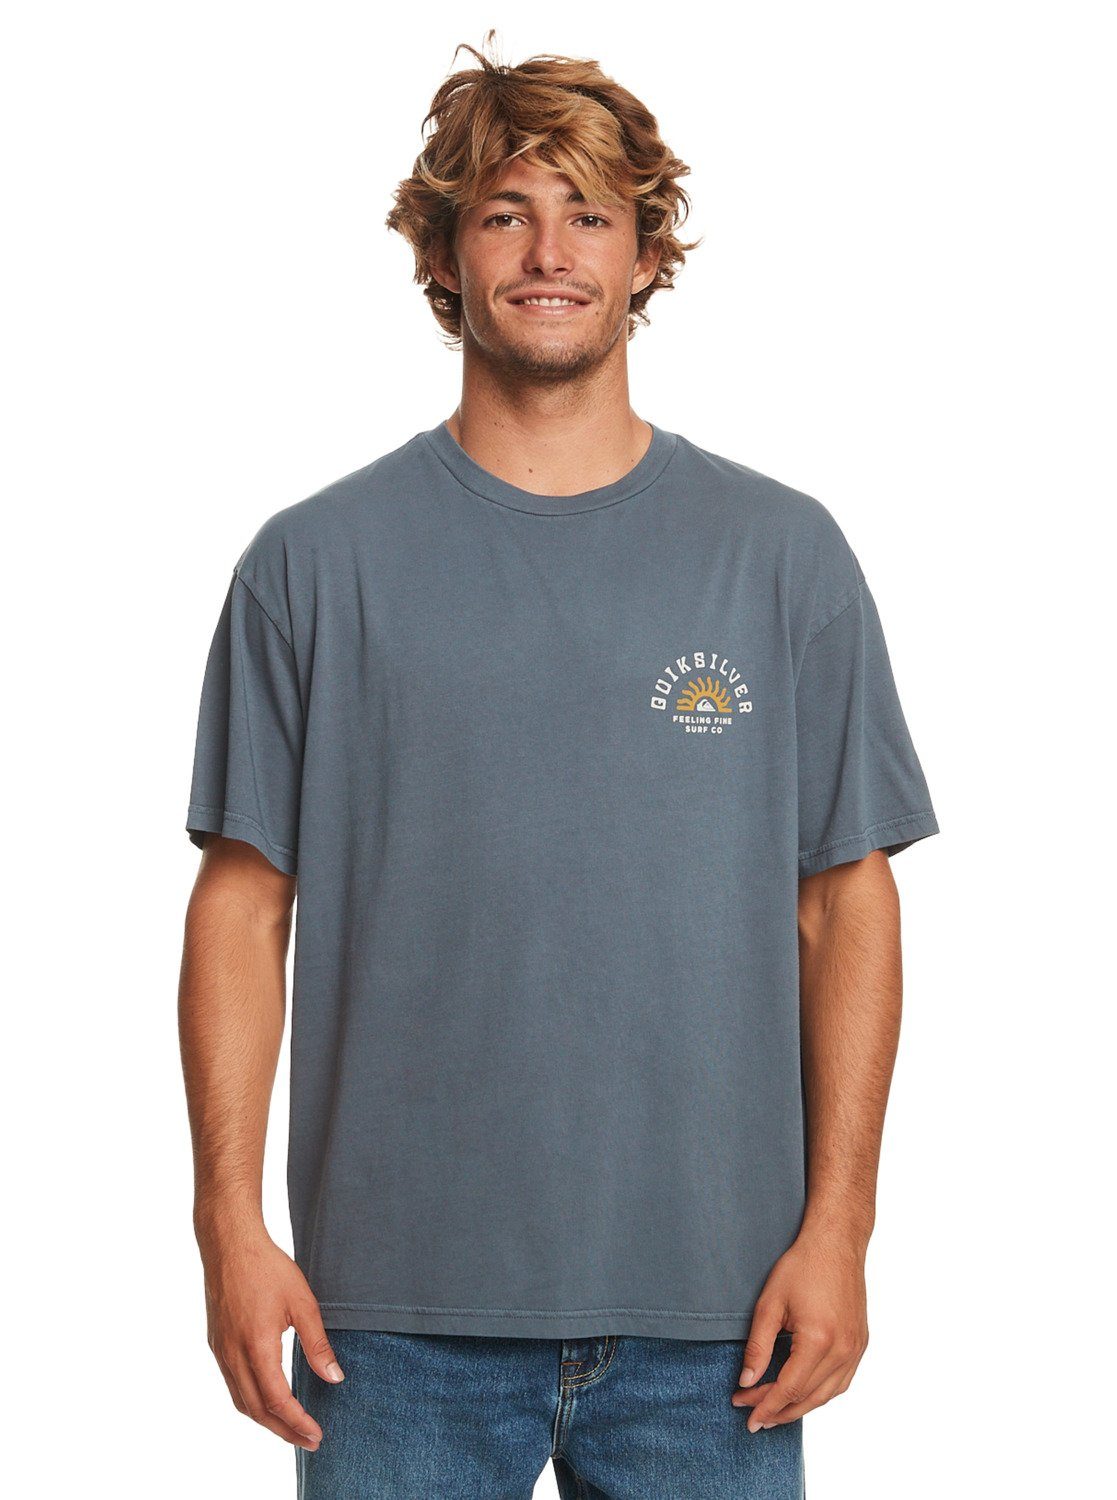 Quiksilver T-Shirt Qs State Of Mind Dark Slate